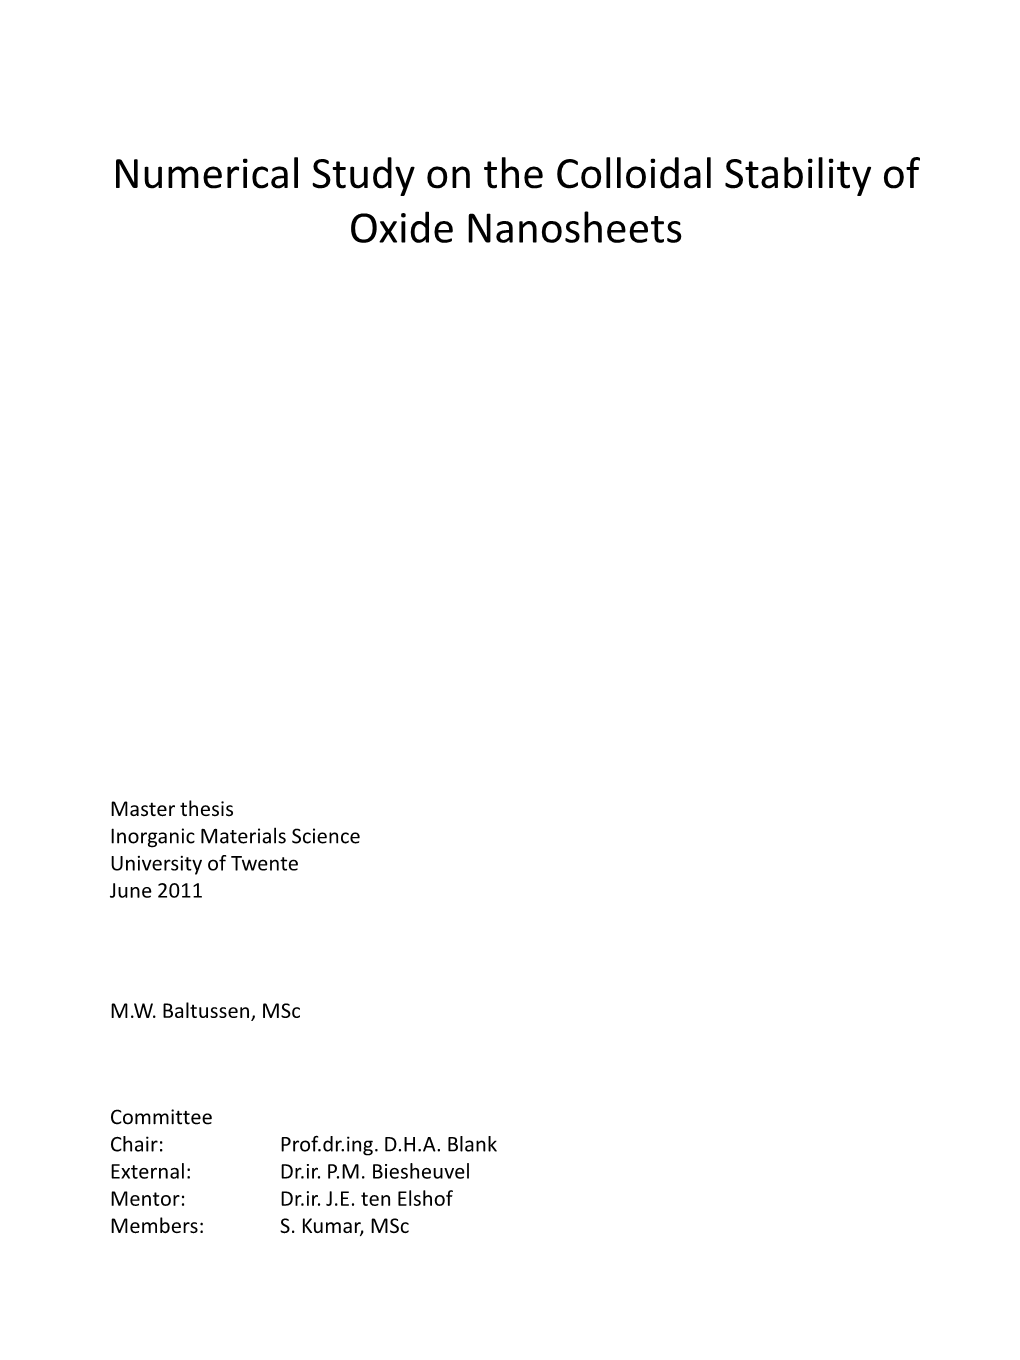 Numerical Study on the Colloidal Stability of Oxide Nanosheets